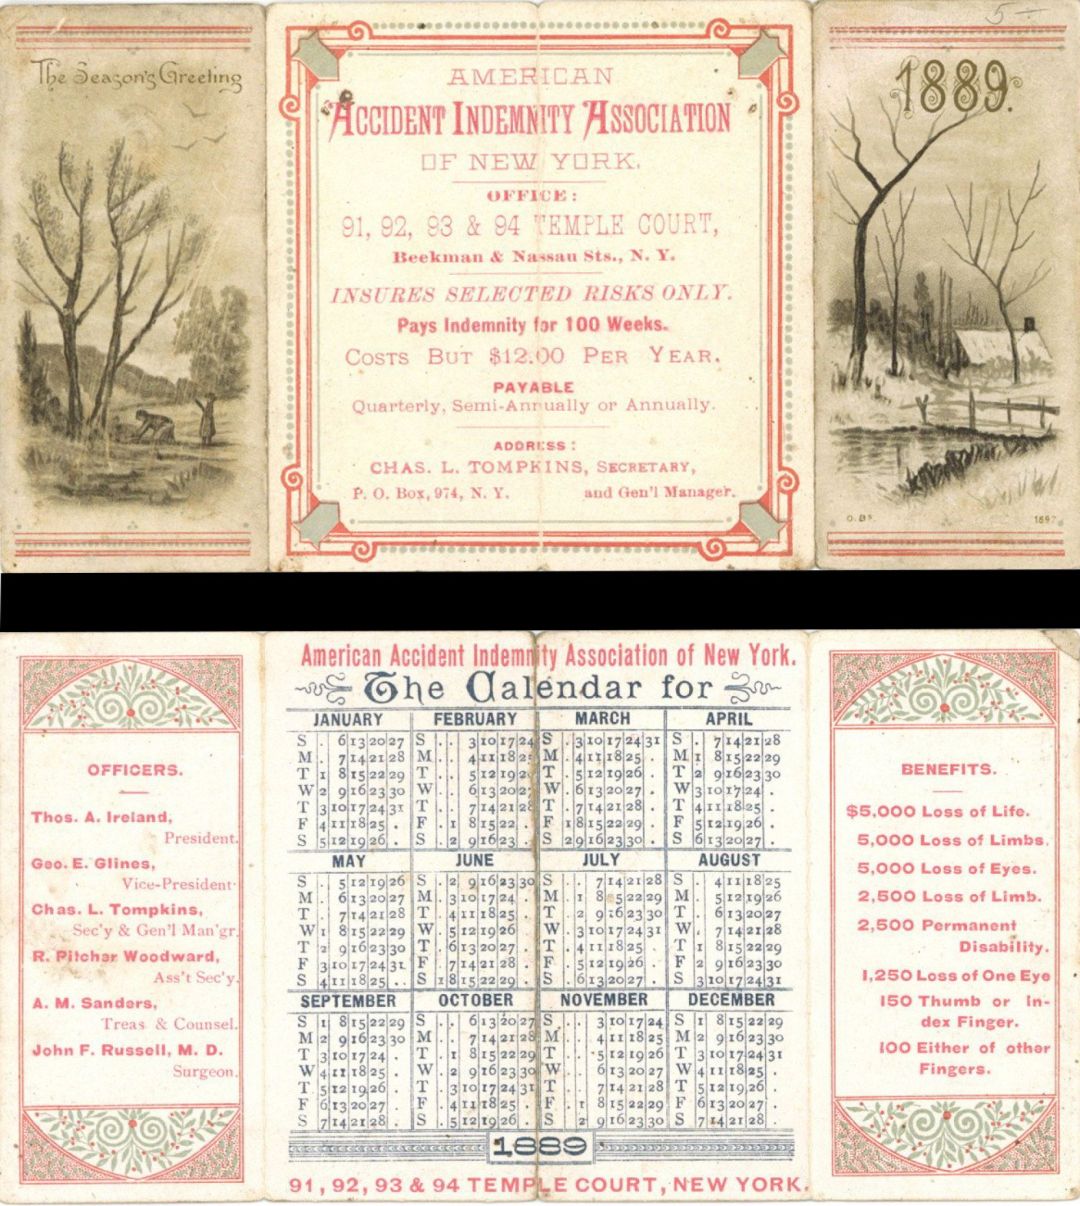 Advertising Calendar for American Accident Indemnity Association - 1889 dated Insurance